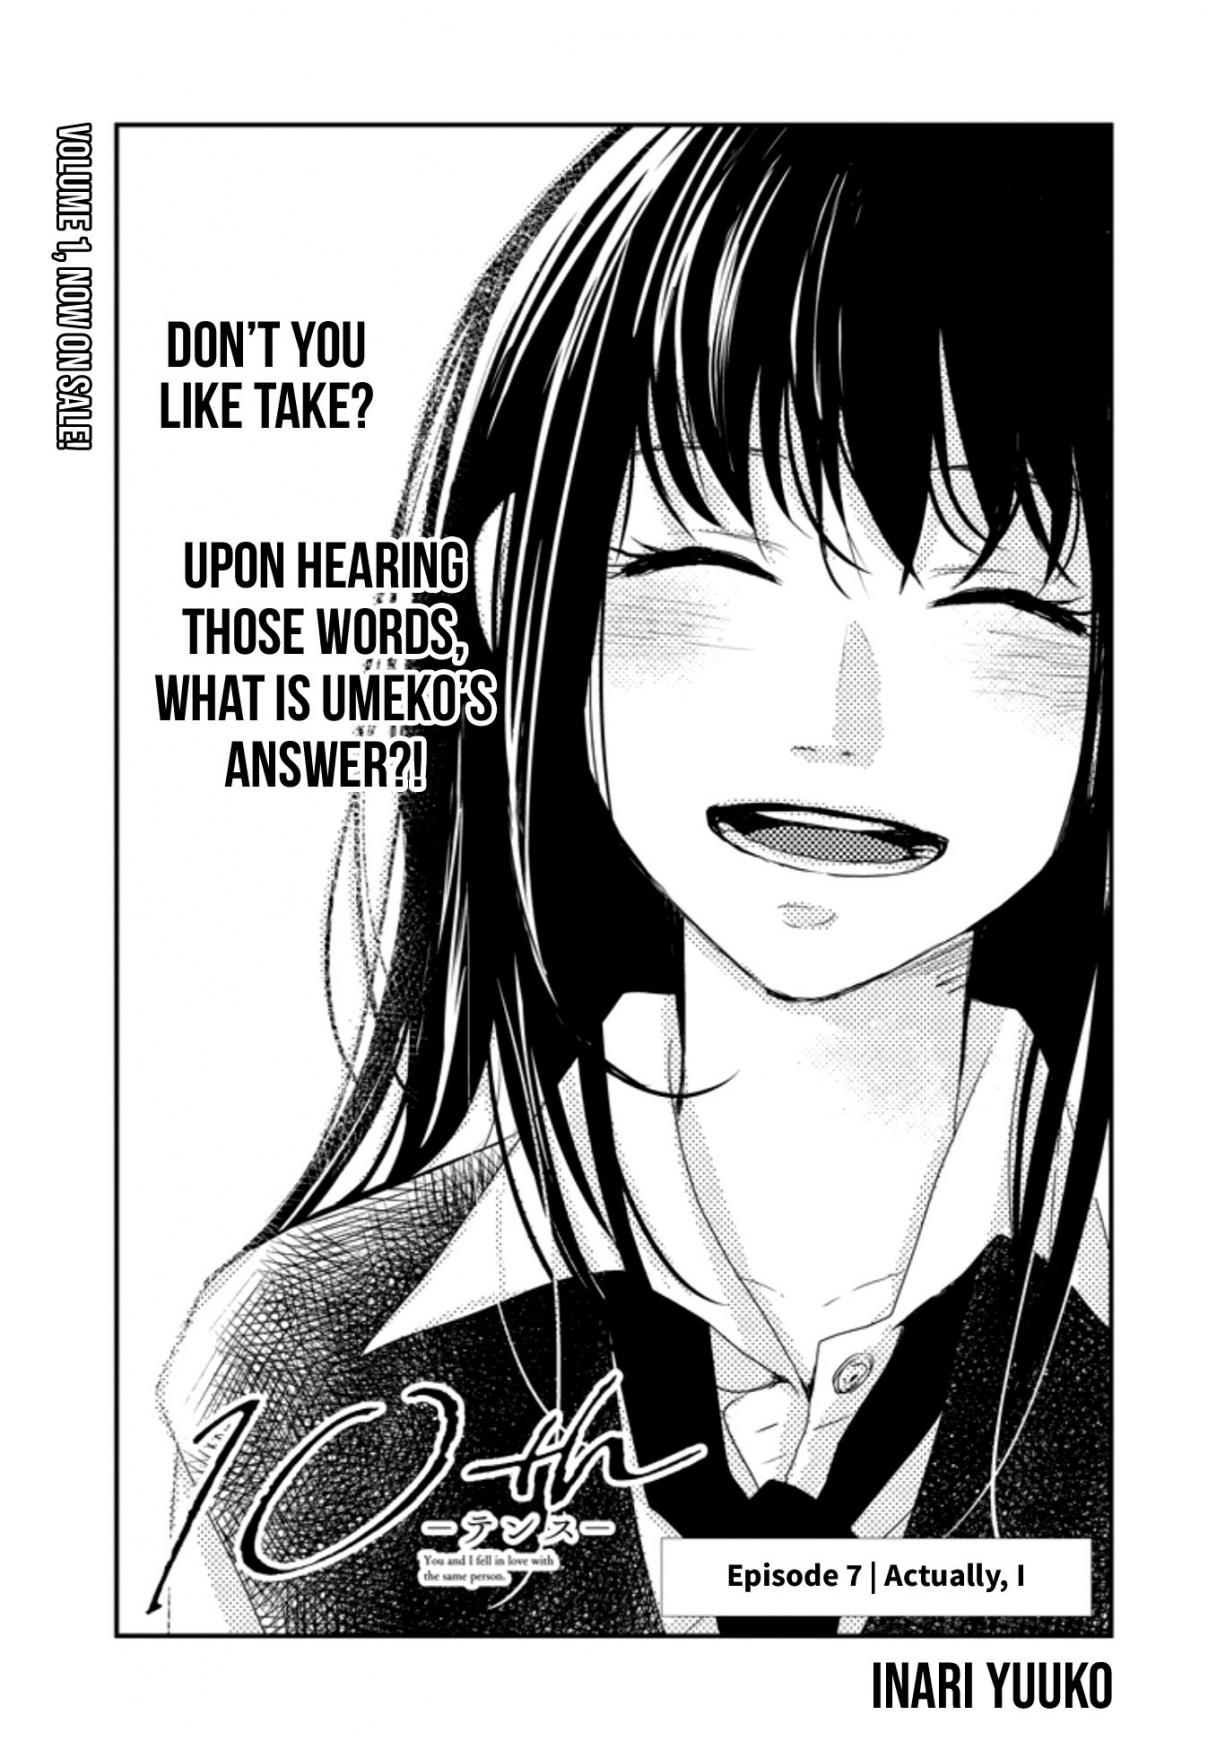 10th You and I Fell in Love With the Same Person. Vol. 2 Ch. 7 Actually, I